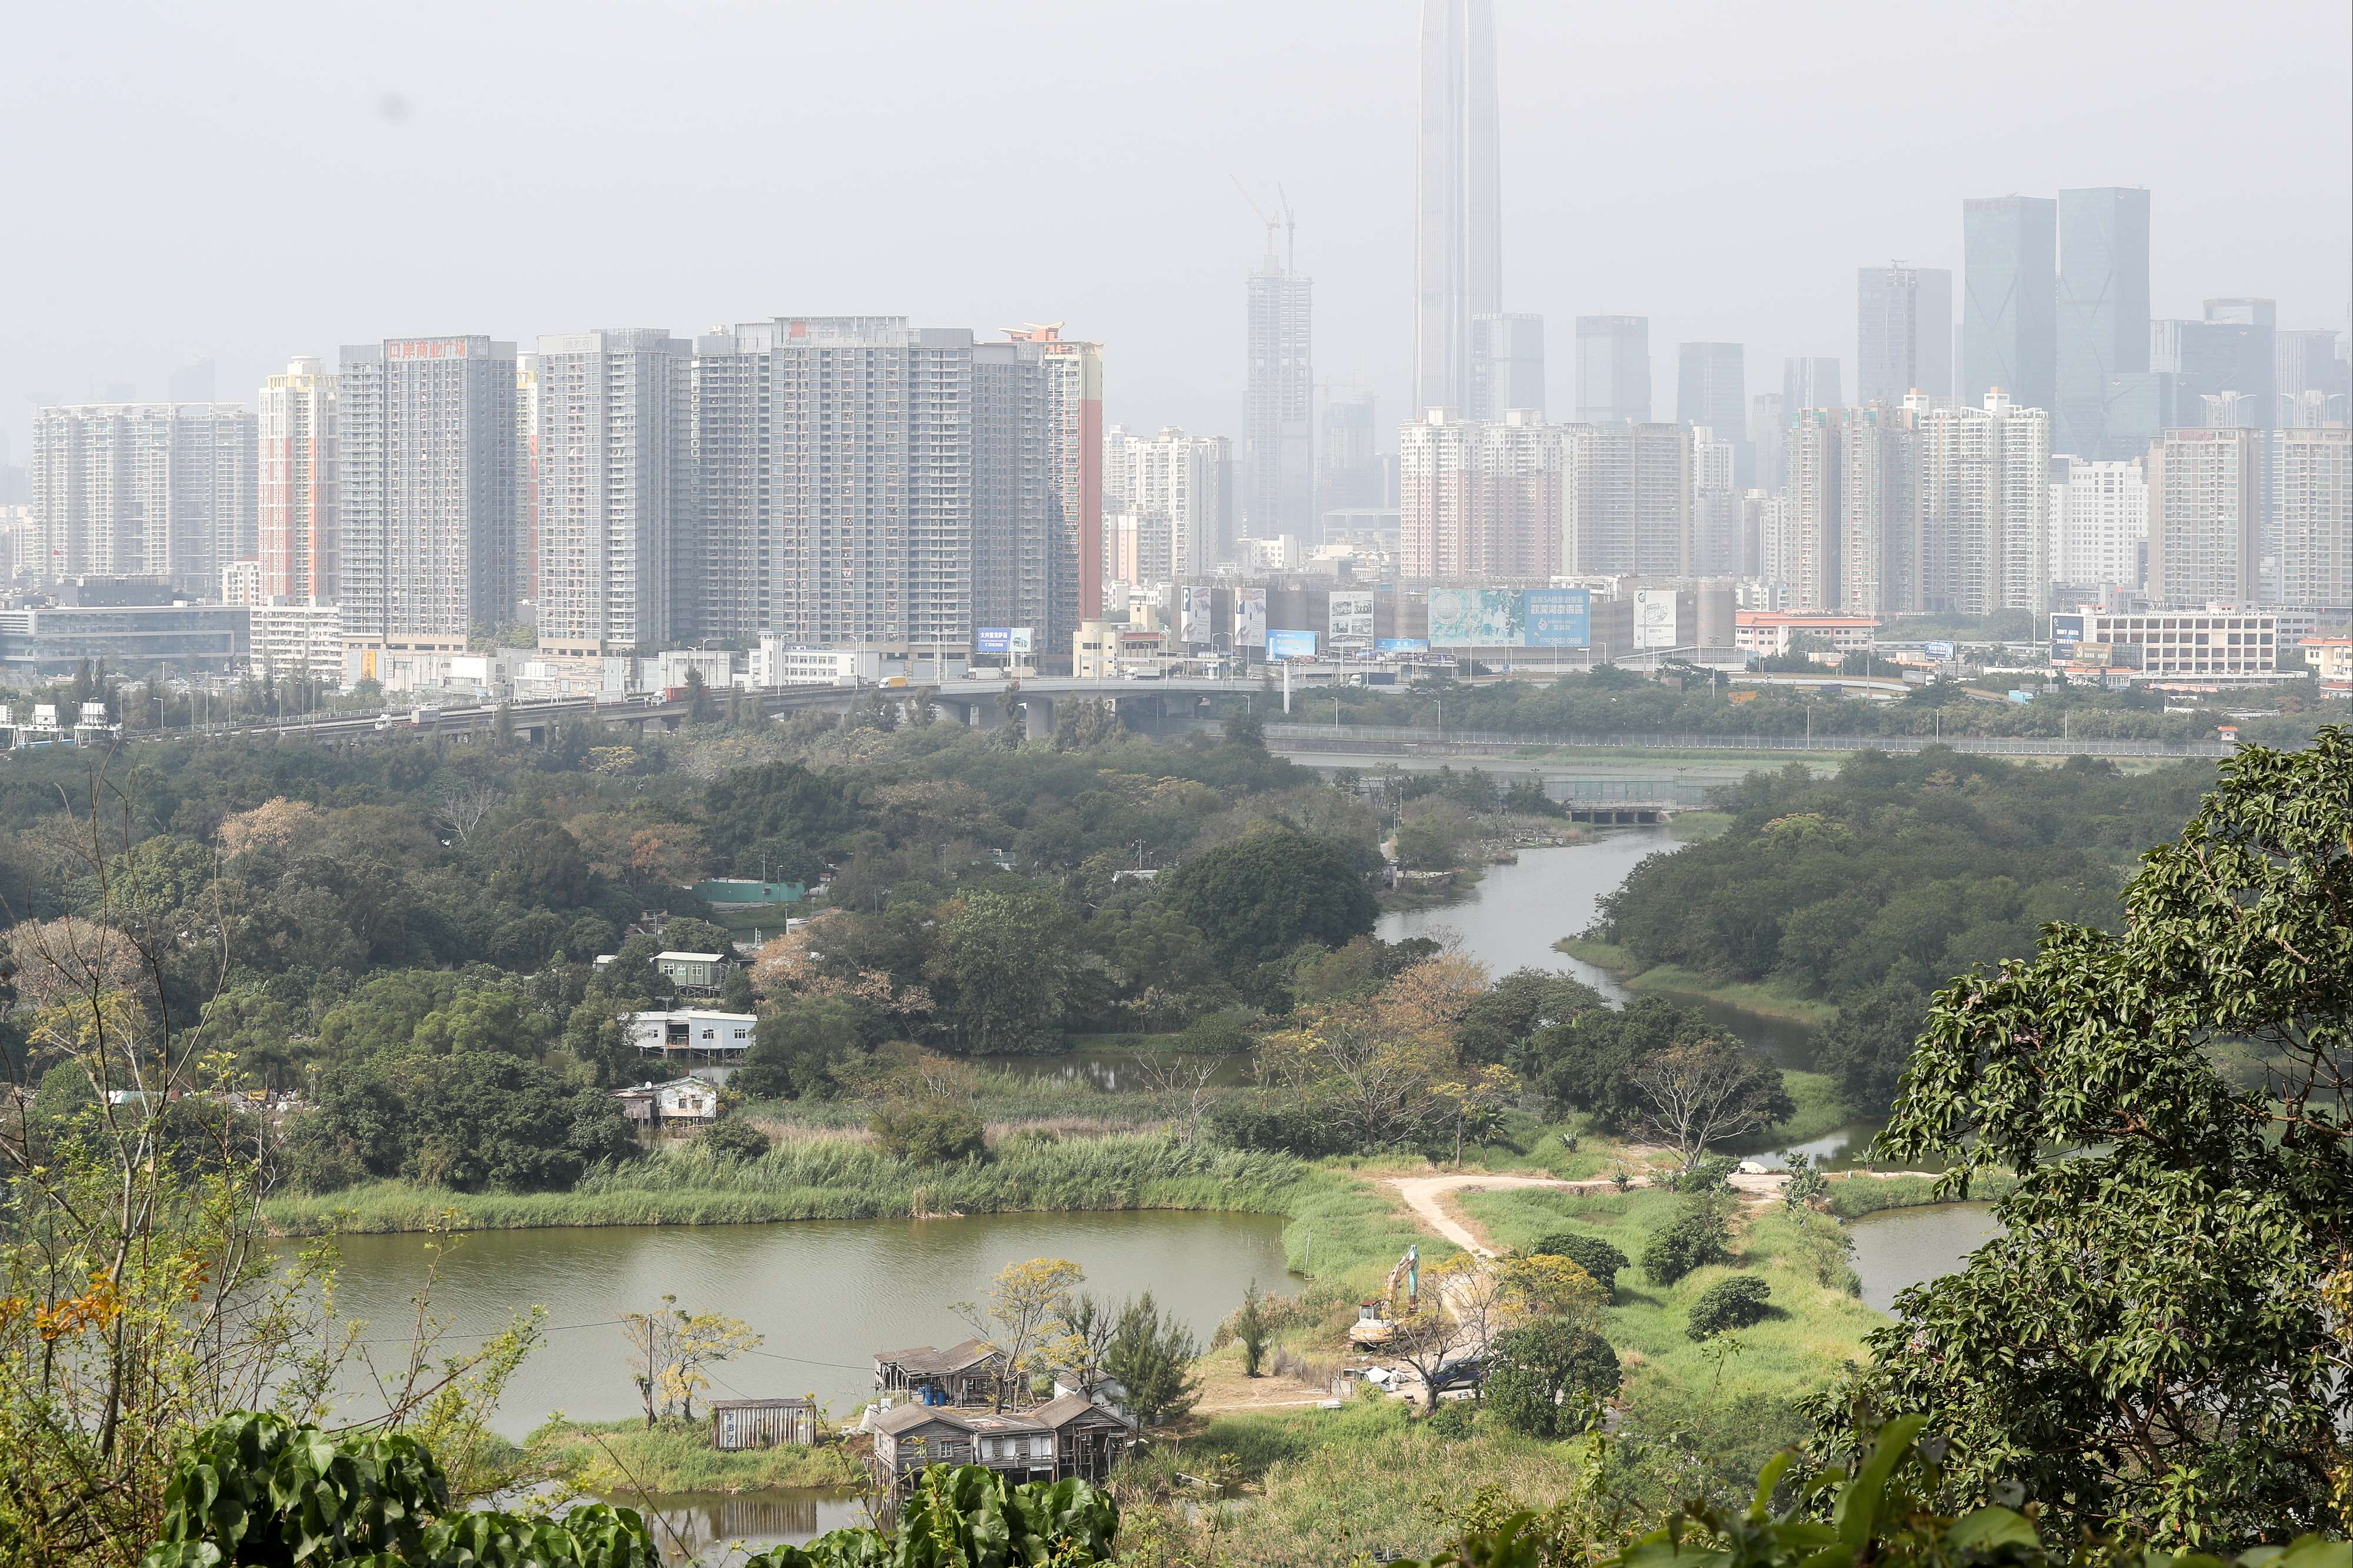 Without adequate real estate to cater for future growth, it will be difficult for Hong Kong to develop a flourishing technology sector. Photo: Nora Tam